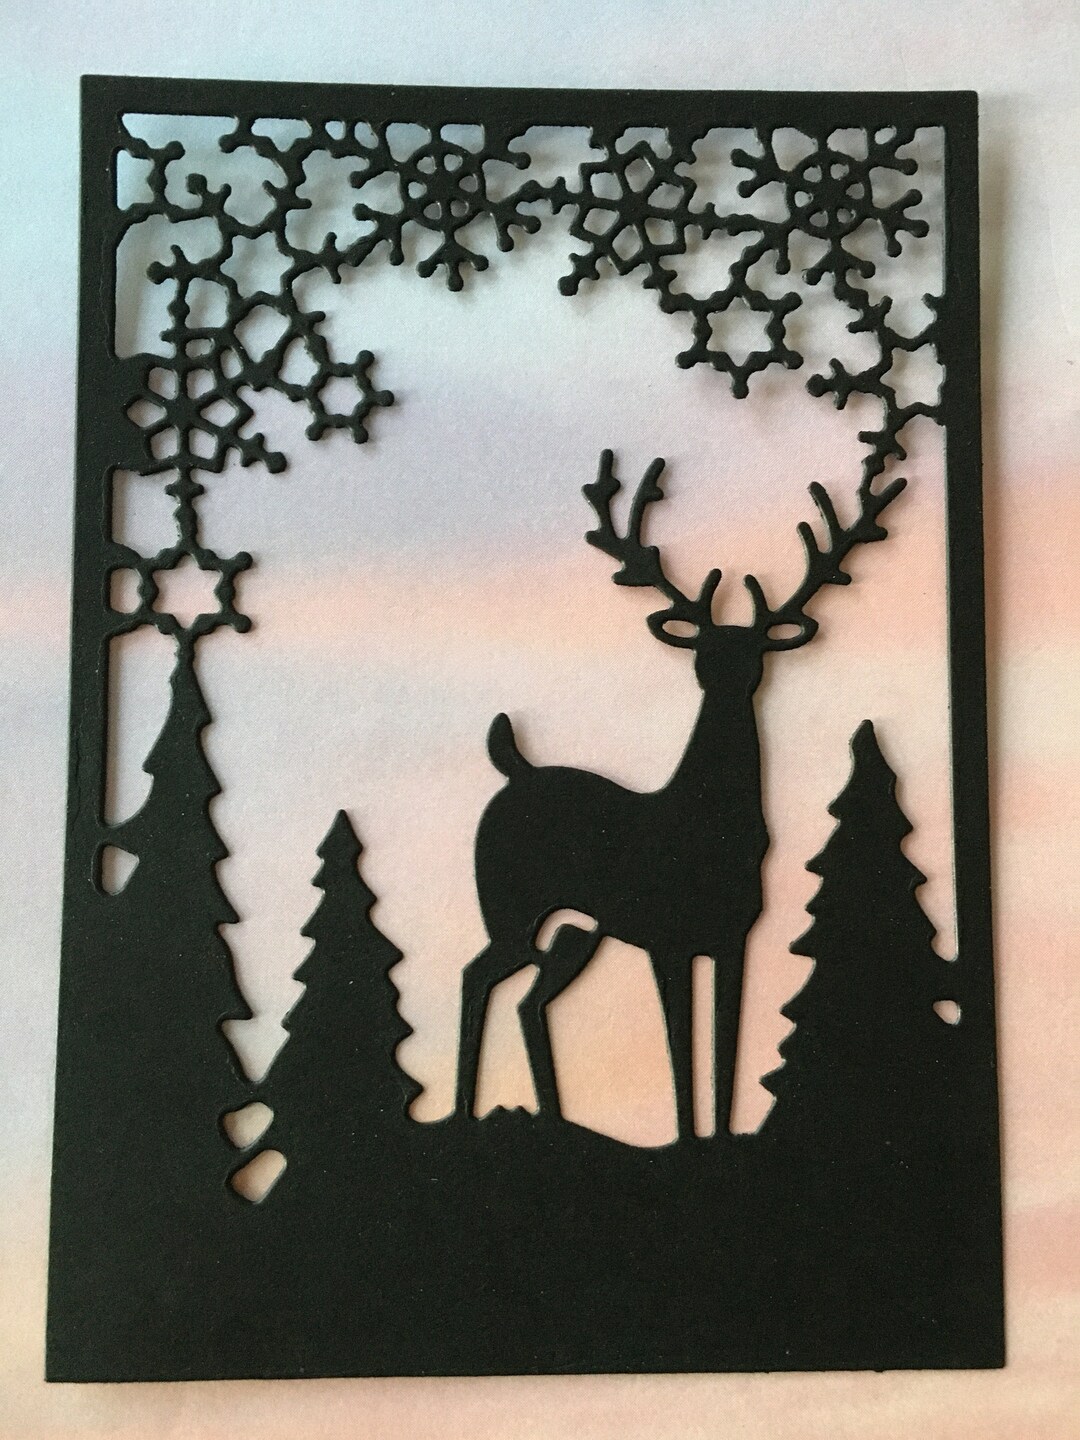 Pine Tree and Deer Die Cut, Card Fronts, Paper Cut Outs, Embellishments ...